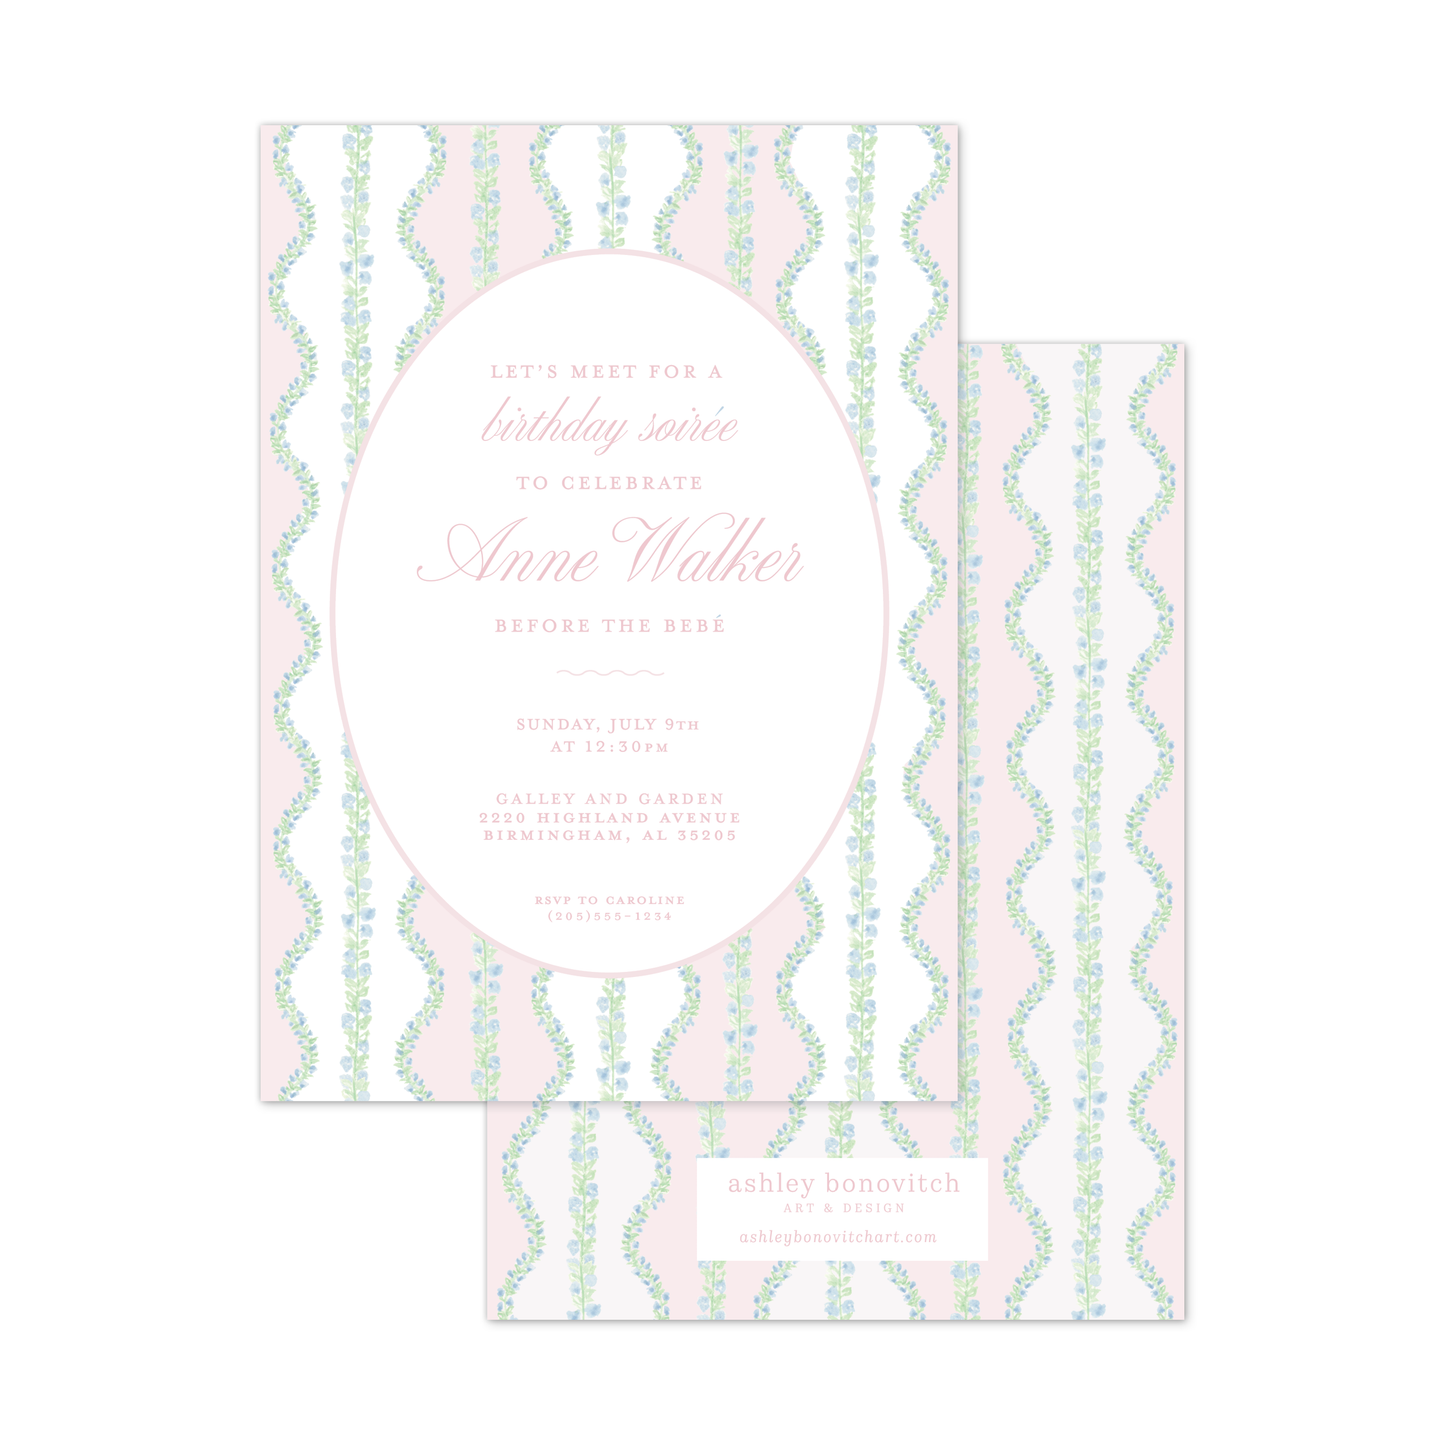 Garden Party Invitations in Pink